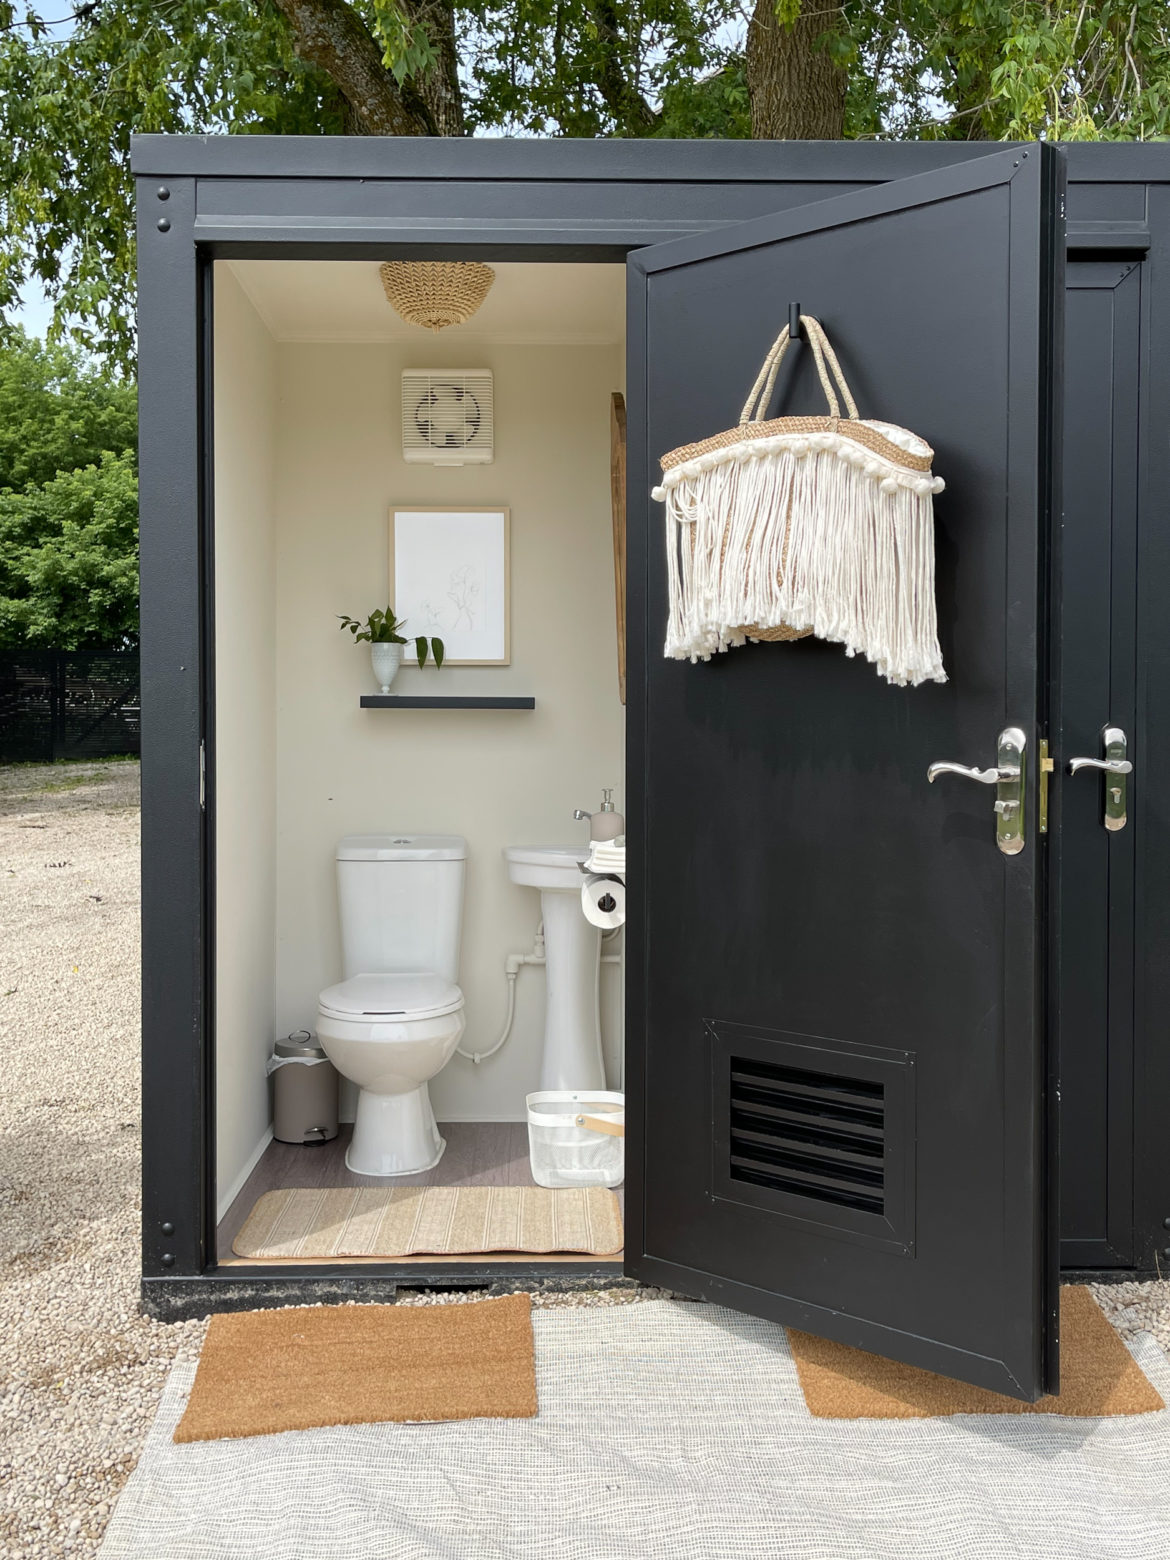 How to build a outhouse toilet